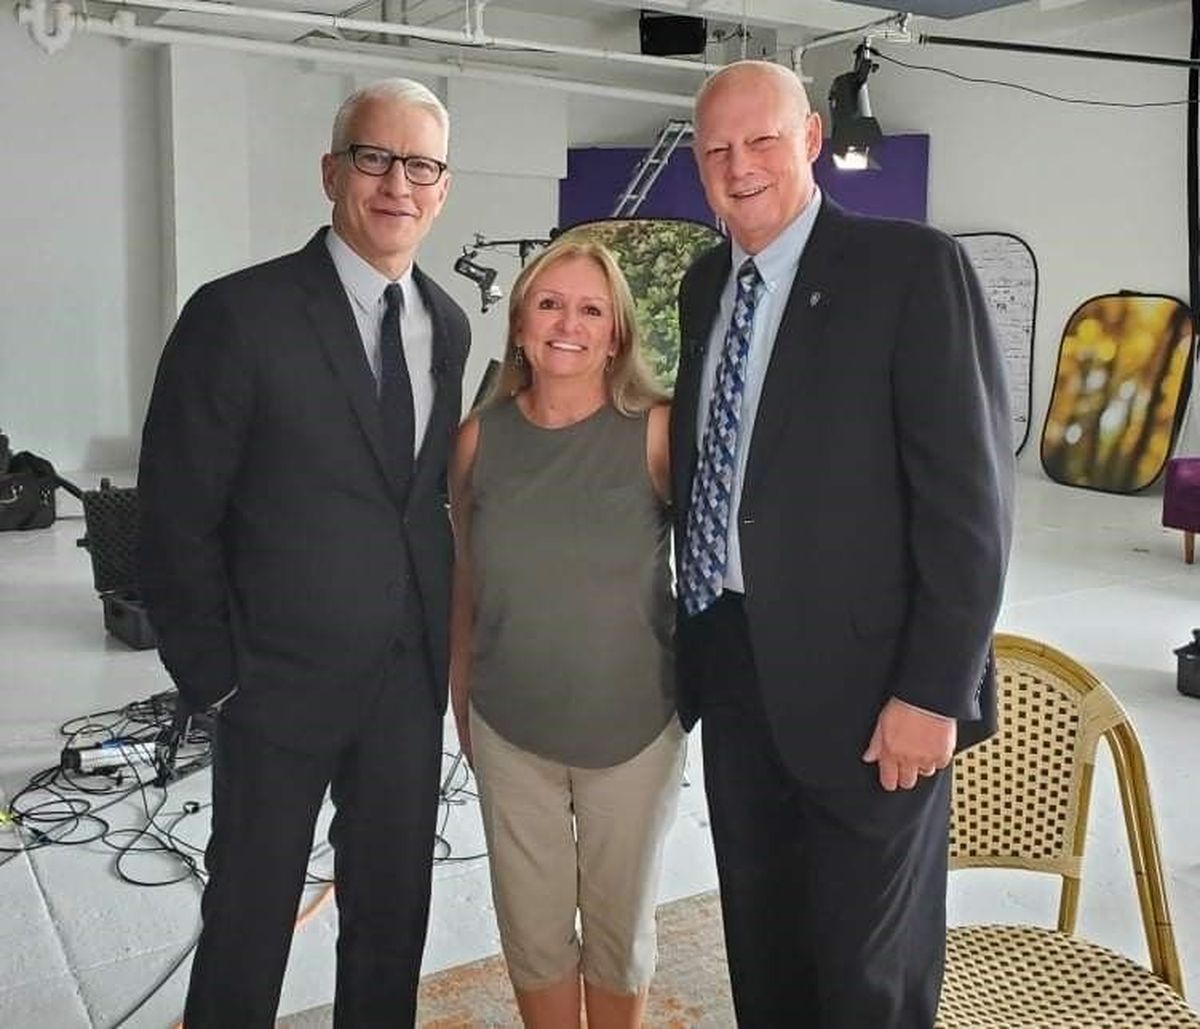 Broadcast journalist Anderson Cooper, left, poses with Pullman Police Chief Gary Jenkins and his wife, Malinda, following his “60 Minutes” interview done in New York City on Aug. 3.  (Courtesy of Gary Jenkins)